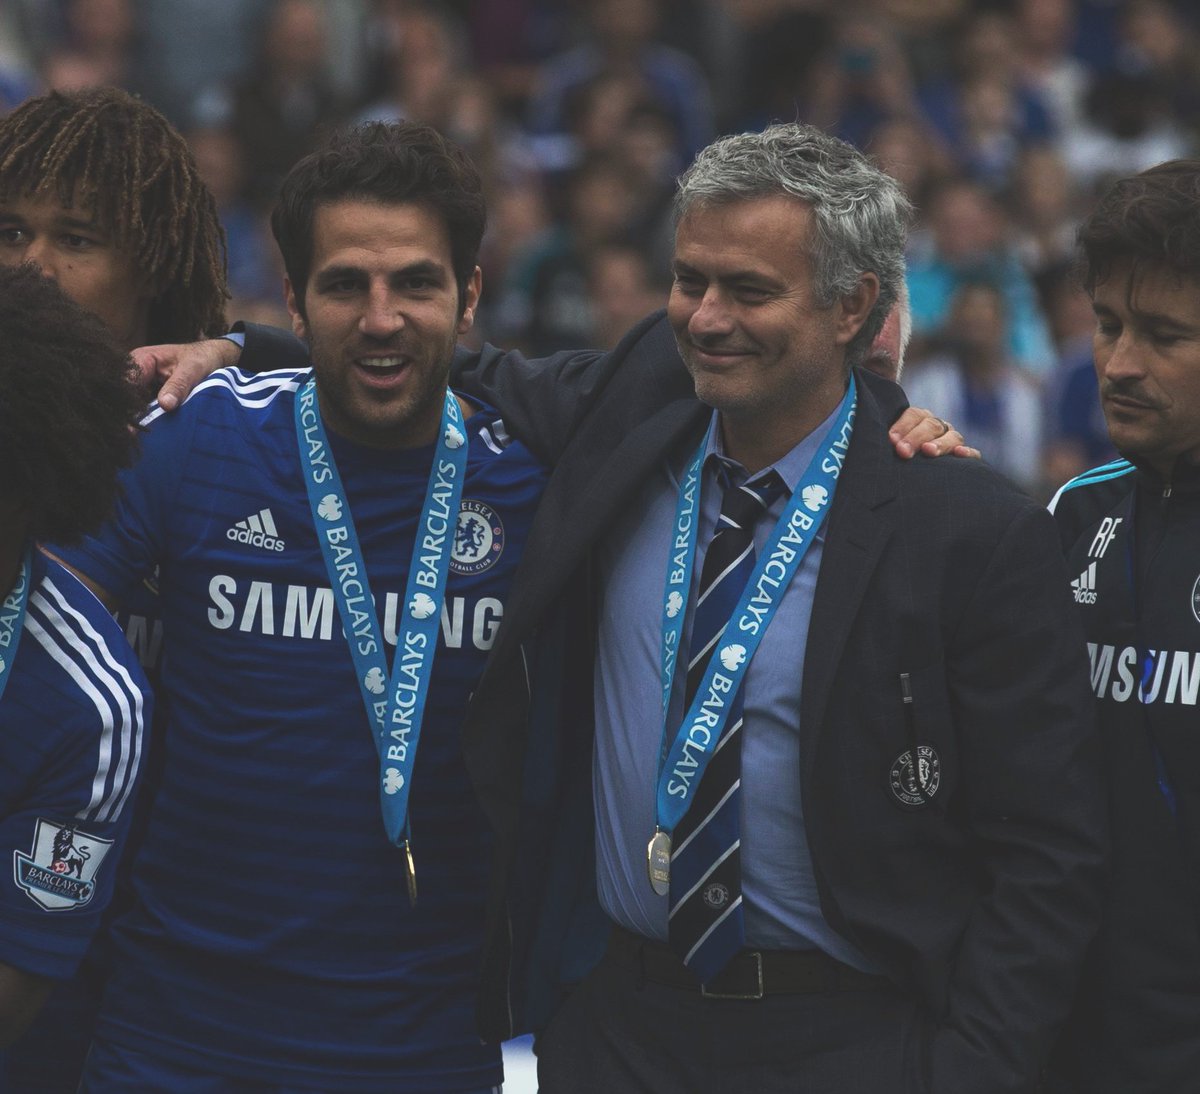 Cesc Fàbregas: "And José, José is the coach that tactically he’s got one system but he works on that system very well. Very well because he’s got the specific players for the right system. He’s a great coach for great players. He stimulates you." [locker room, FIVE yt]